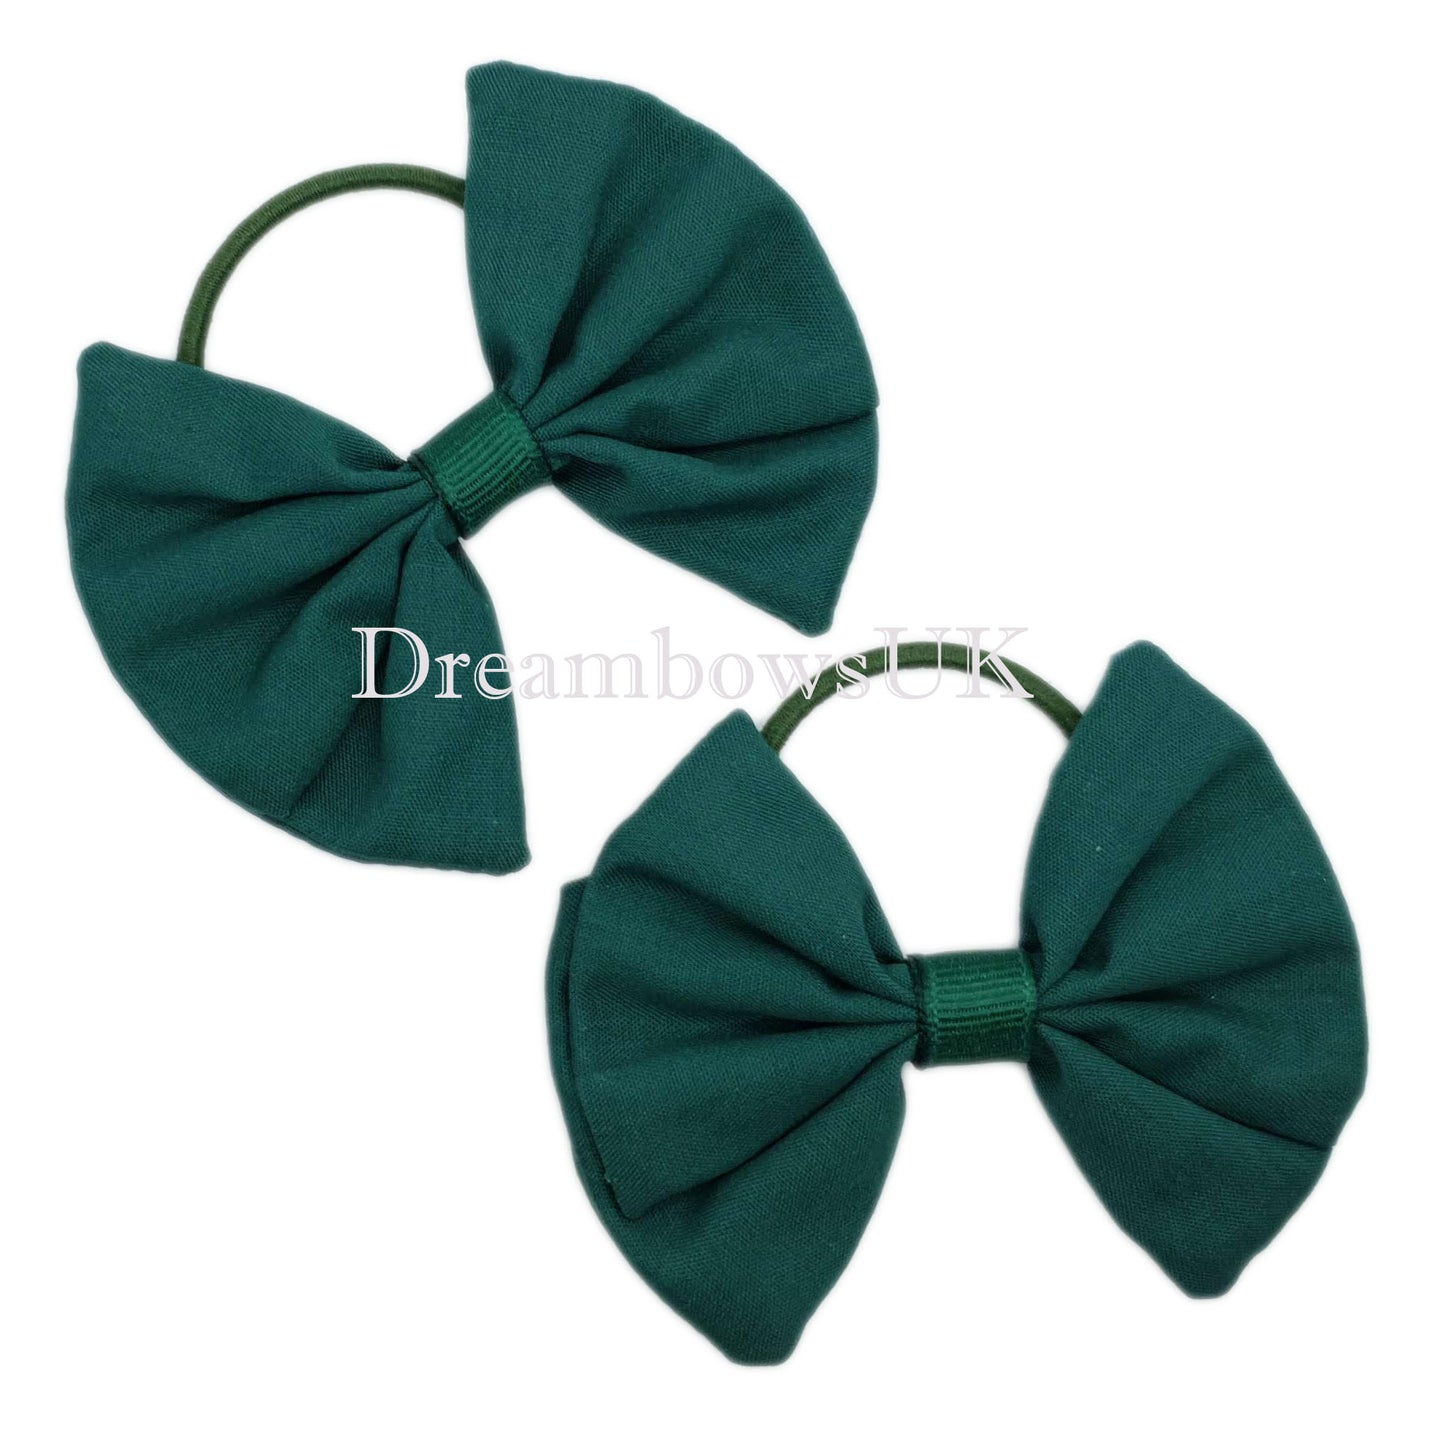 Bottle green bows on thin hair ties